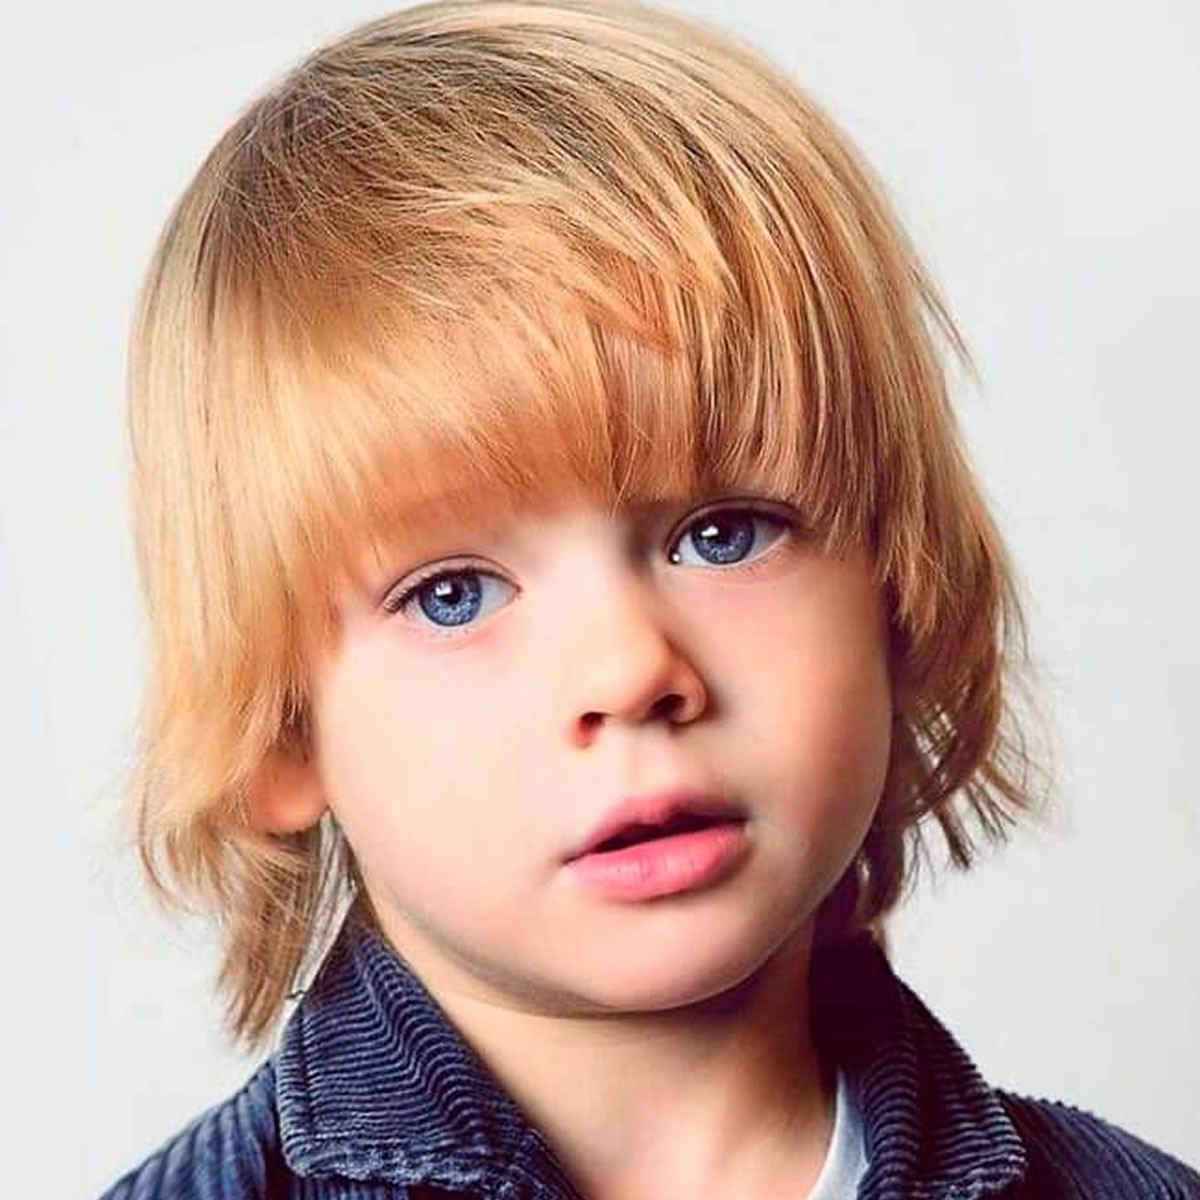 Little Boys Haircuts 2019
 Great Hairstyles and Haircuts ideas for Little Boys 2018